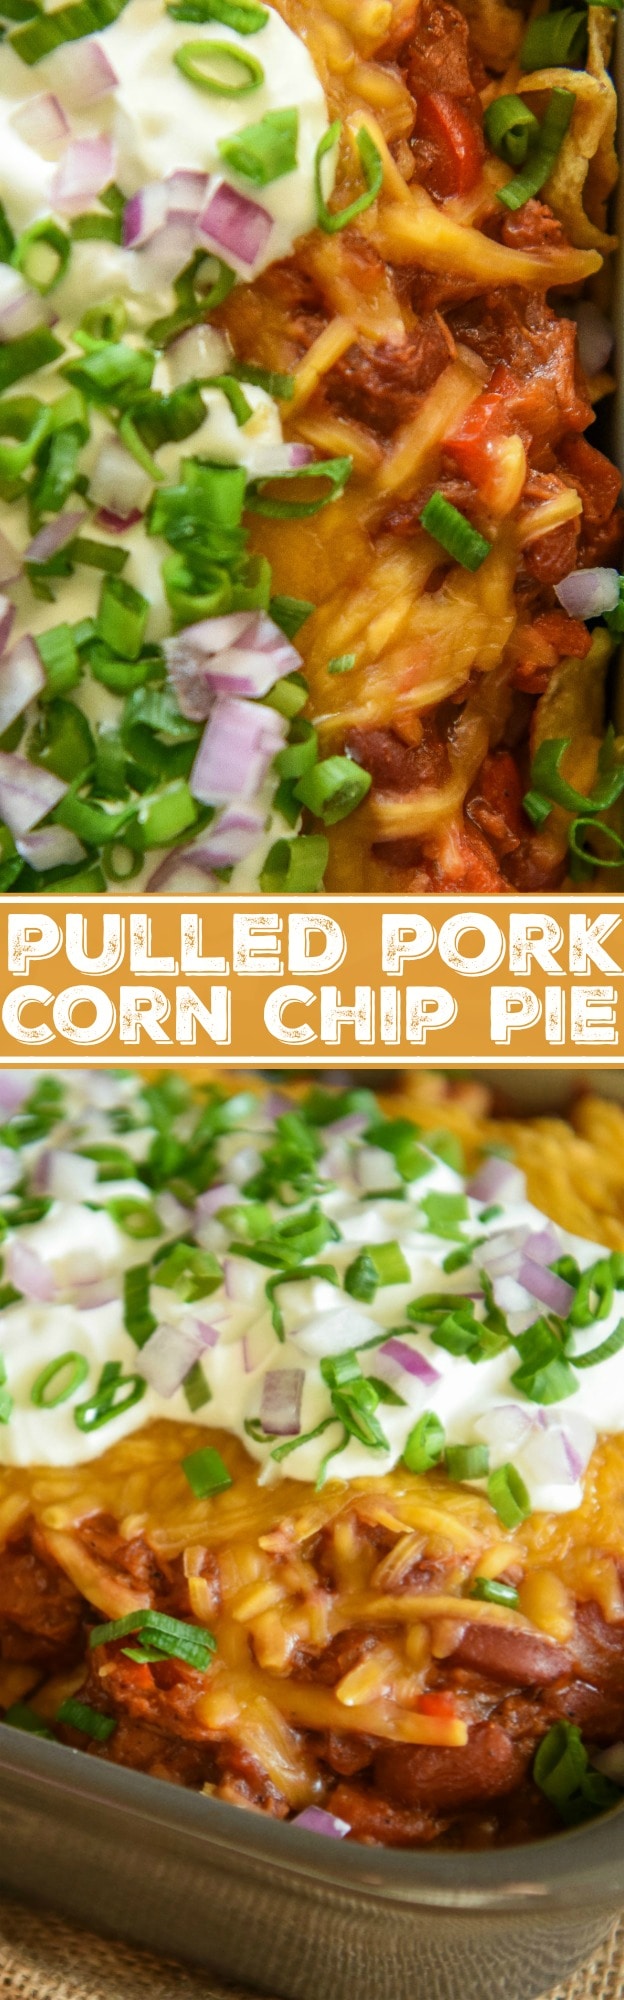 Pulled Pork Corn Chip Pie: upgrade your favorite tailgate food with this easy pulled pork chili corn chip pie served with cheddar cheese, sour cream and onions!